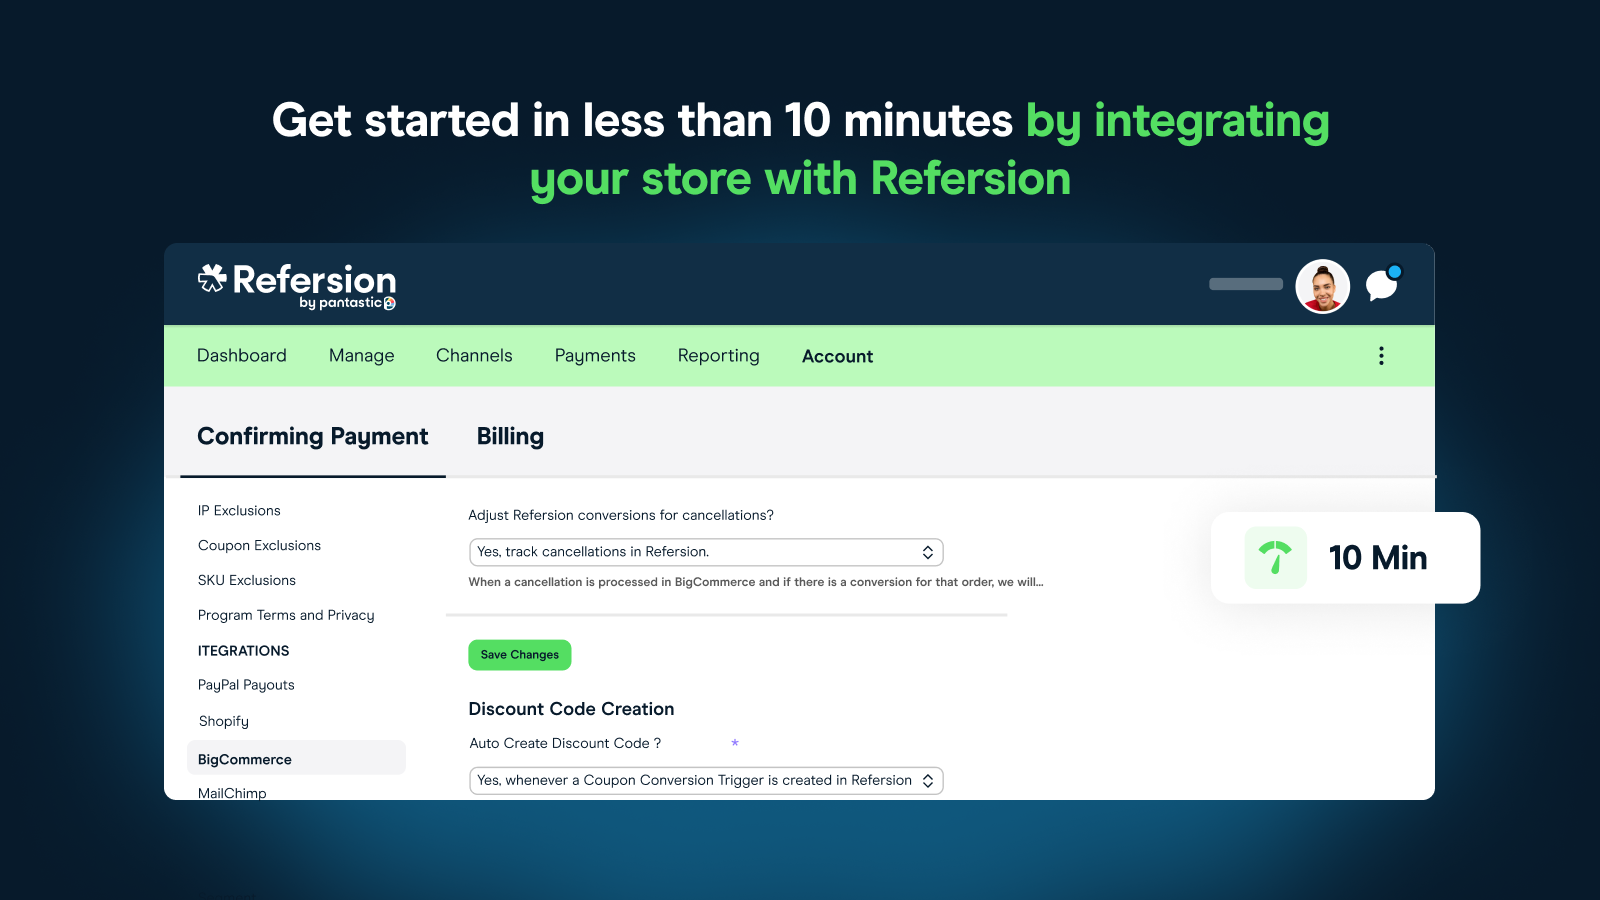 Easy to get started! Seamlessly connect your store in minutes so you can spend time running your program.